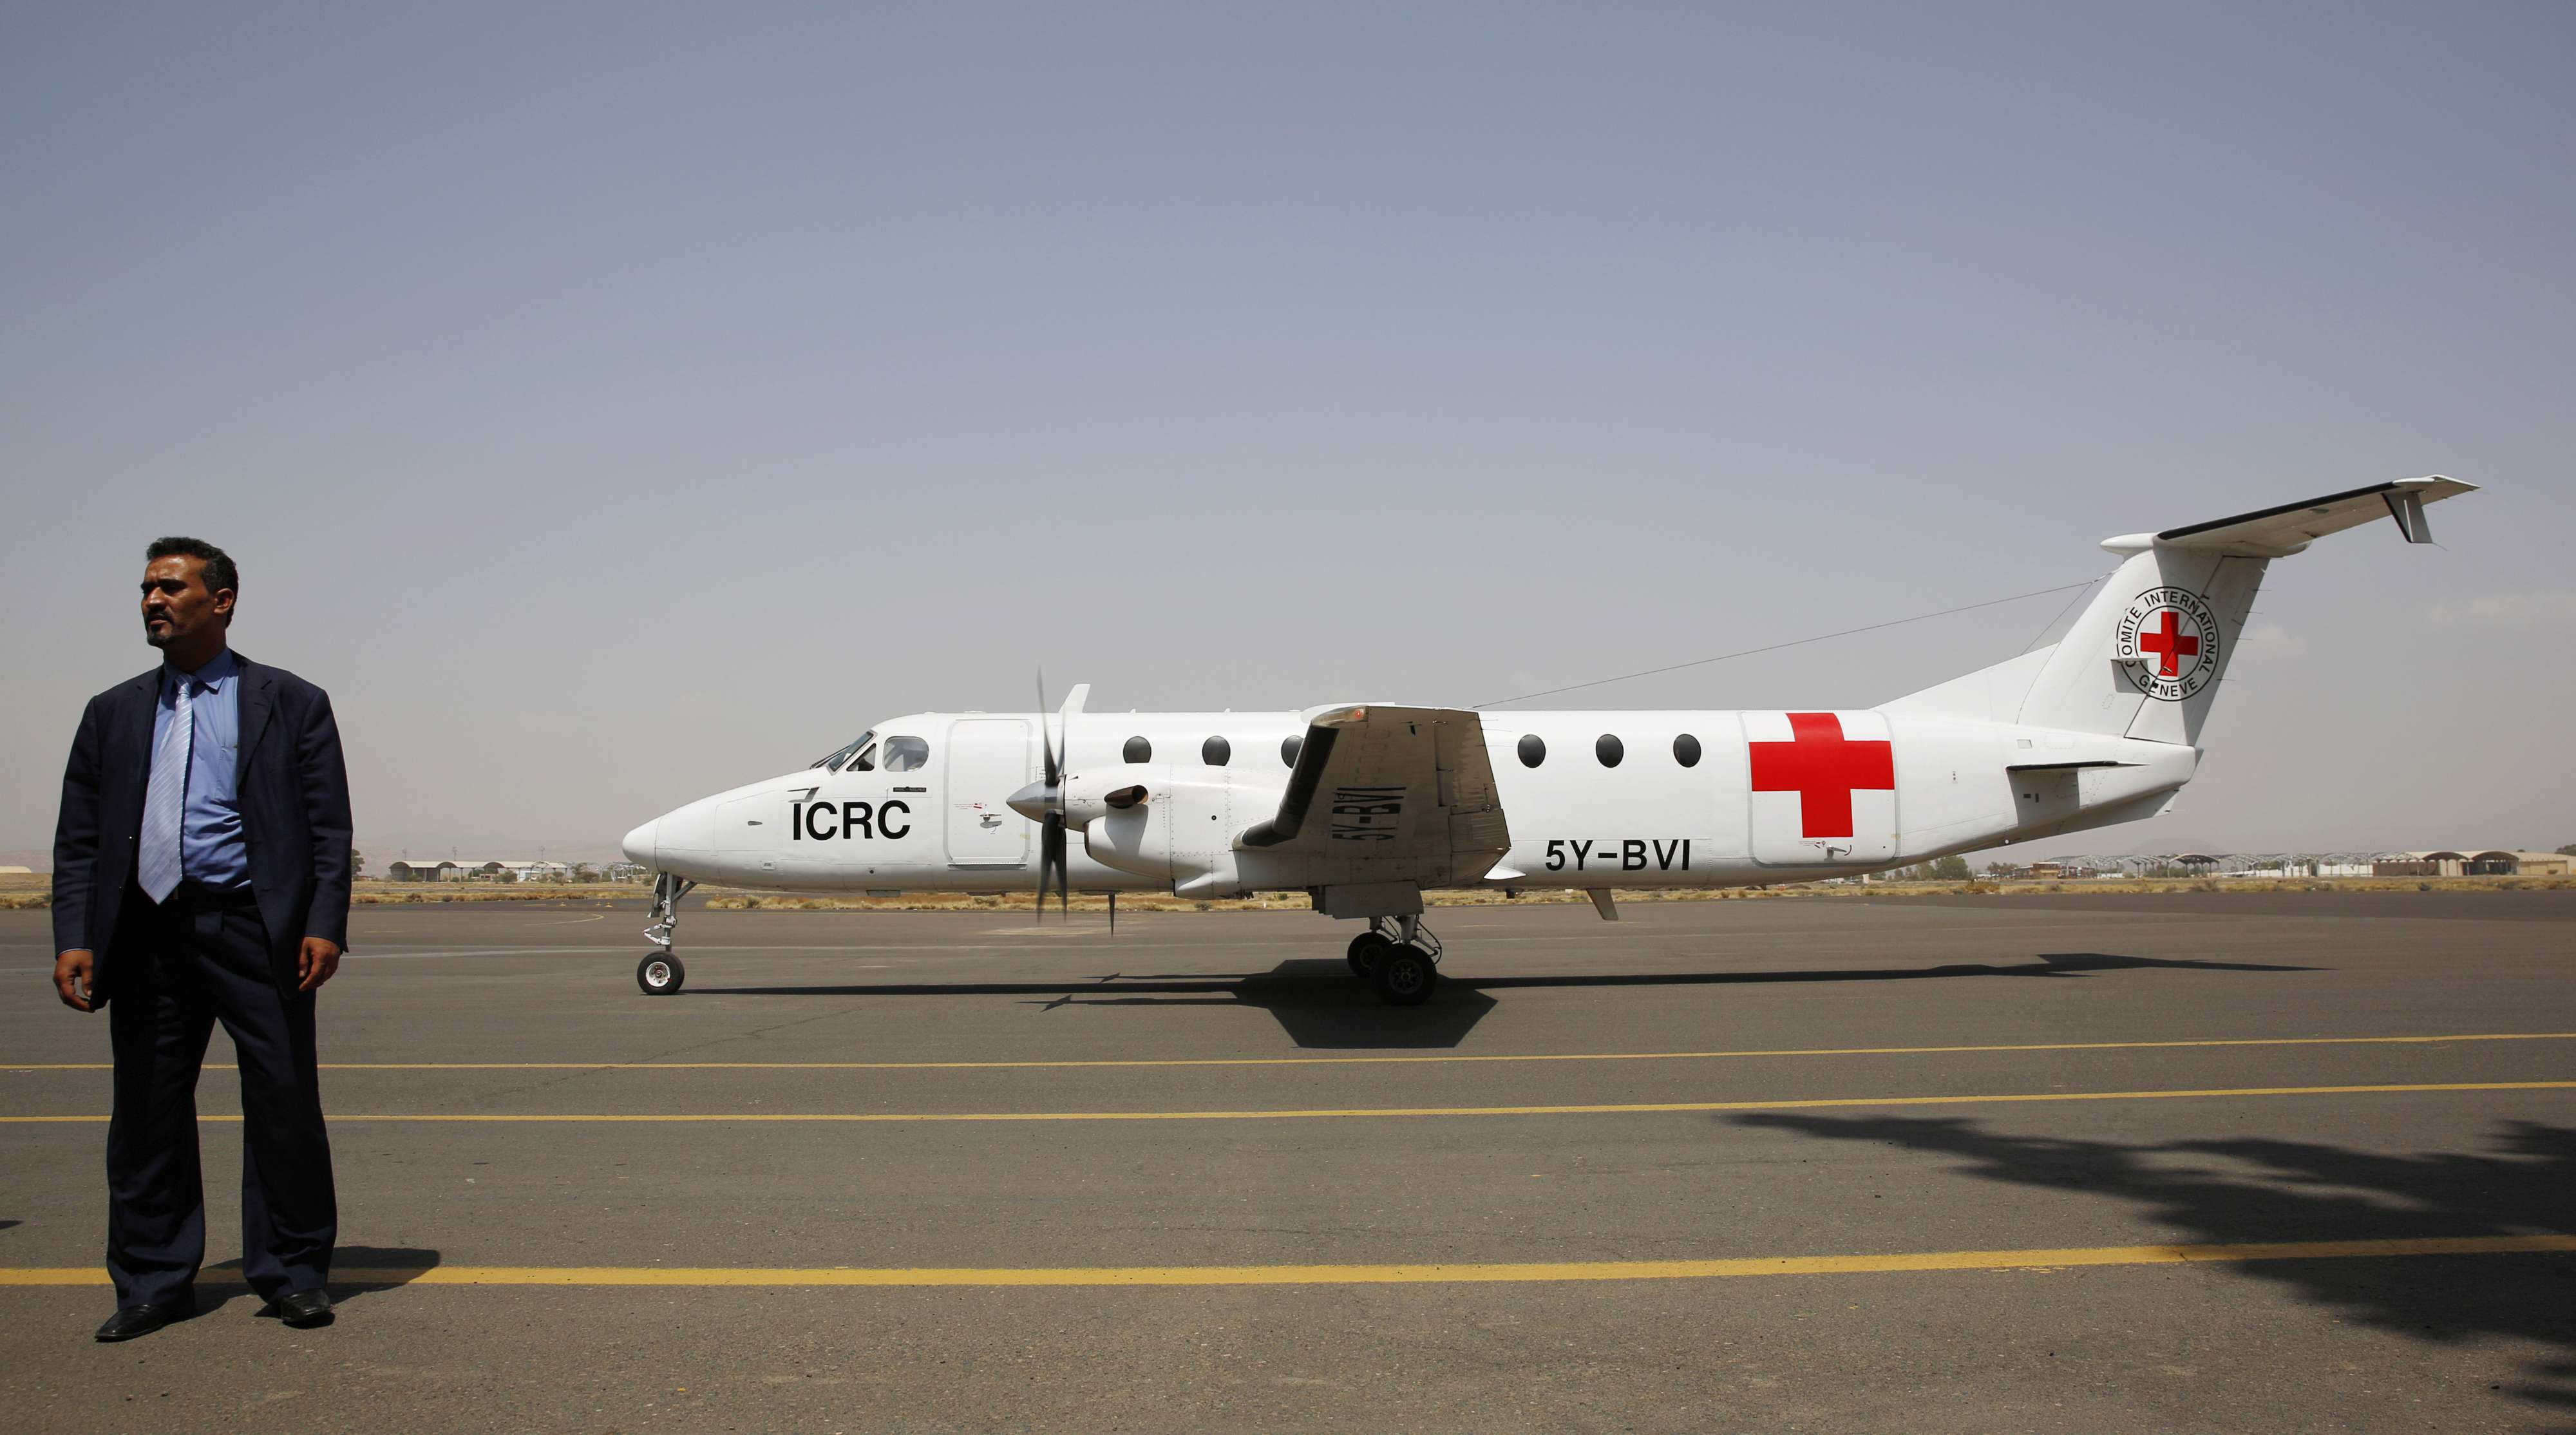 A Yemeni airport security official stands by a plane of the International Committee of the Red Cross